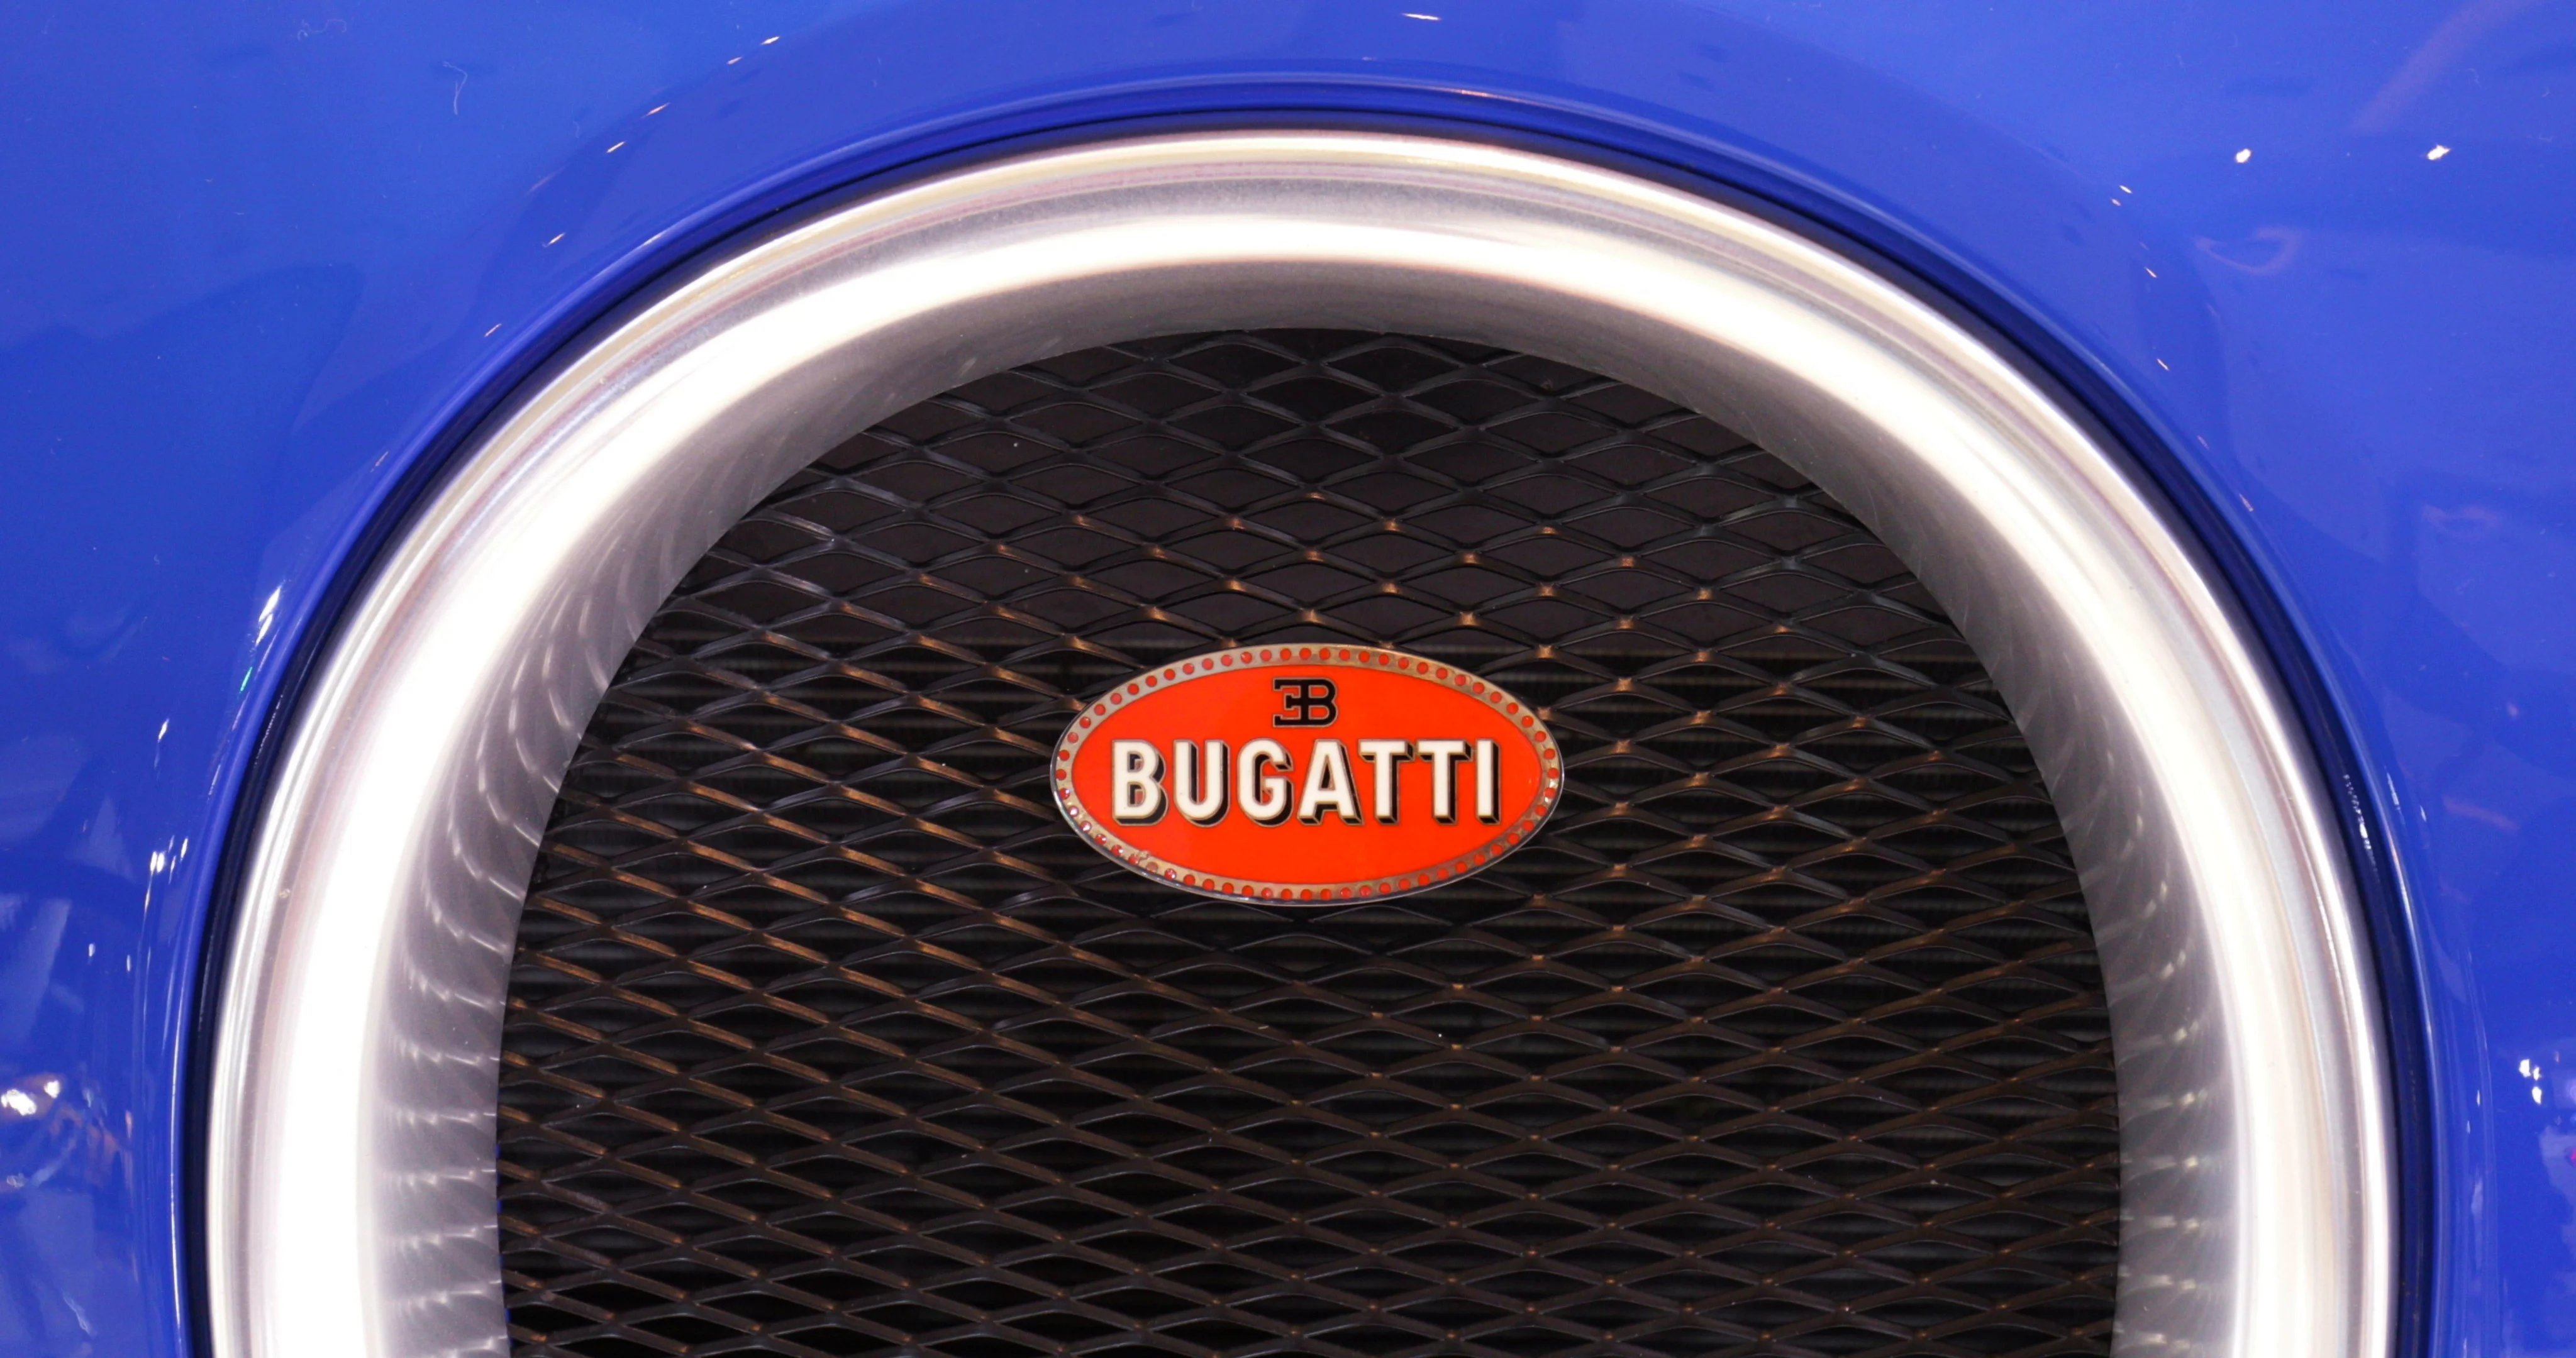 This 8,000-mile Bugatti Veyron is Bring a Trailer's 50,000th listing - CNET